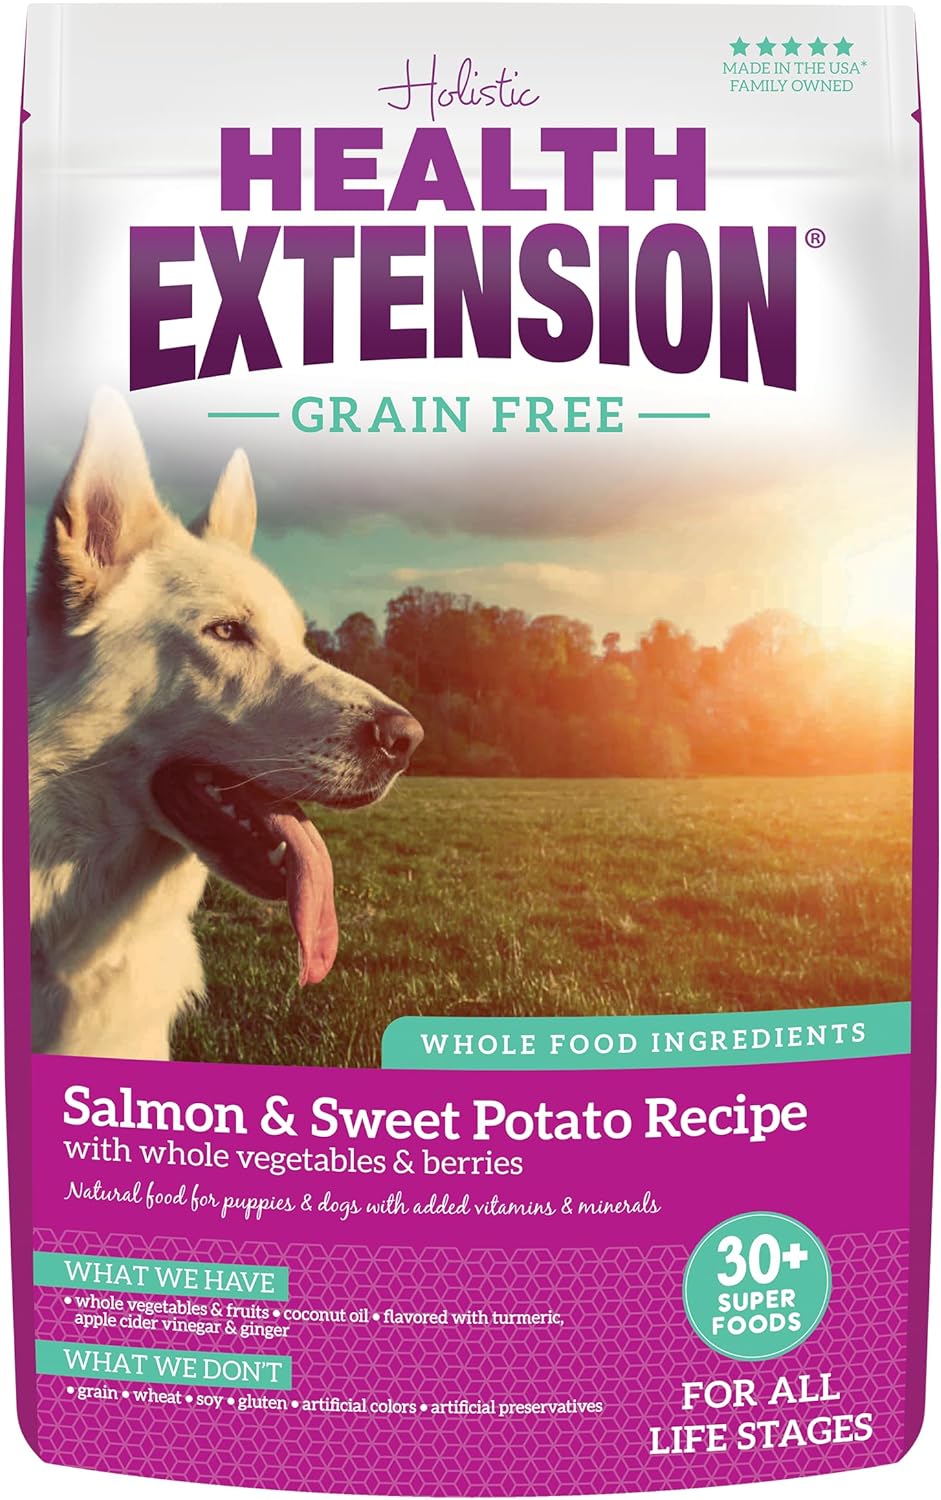 Health Extension Dry Dog Food, Natural Food with Added Vitamins & Minerals, Suitable for All Puppies, Grain Free, Salmon & Sweet Potato Recipe with Whole Vegetable & Berries (4 Pound)